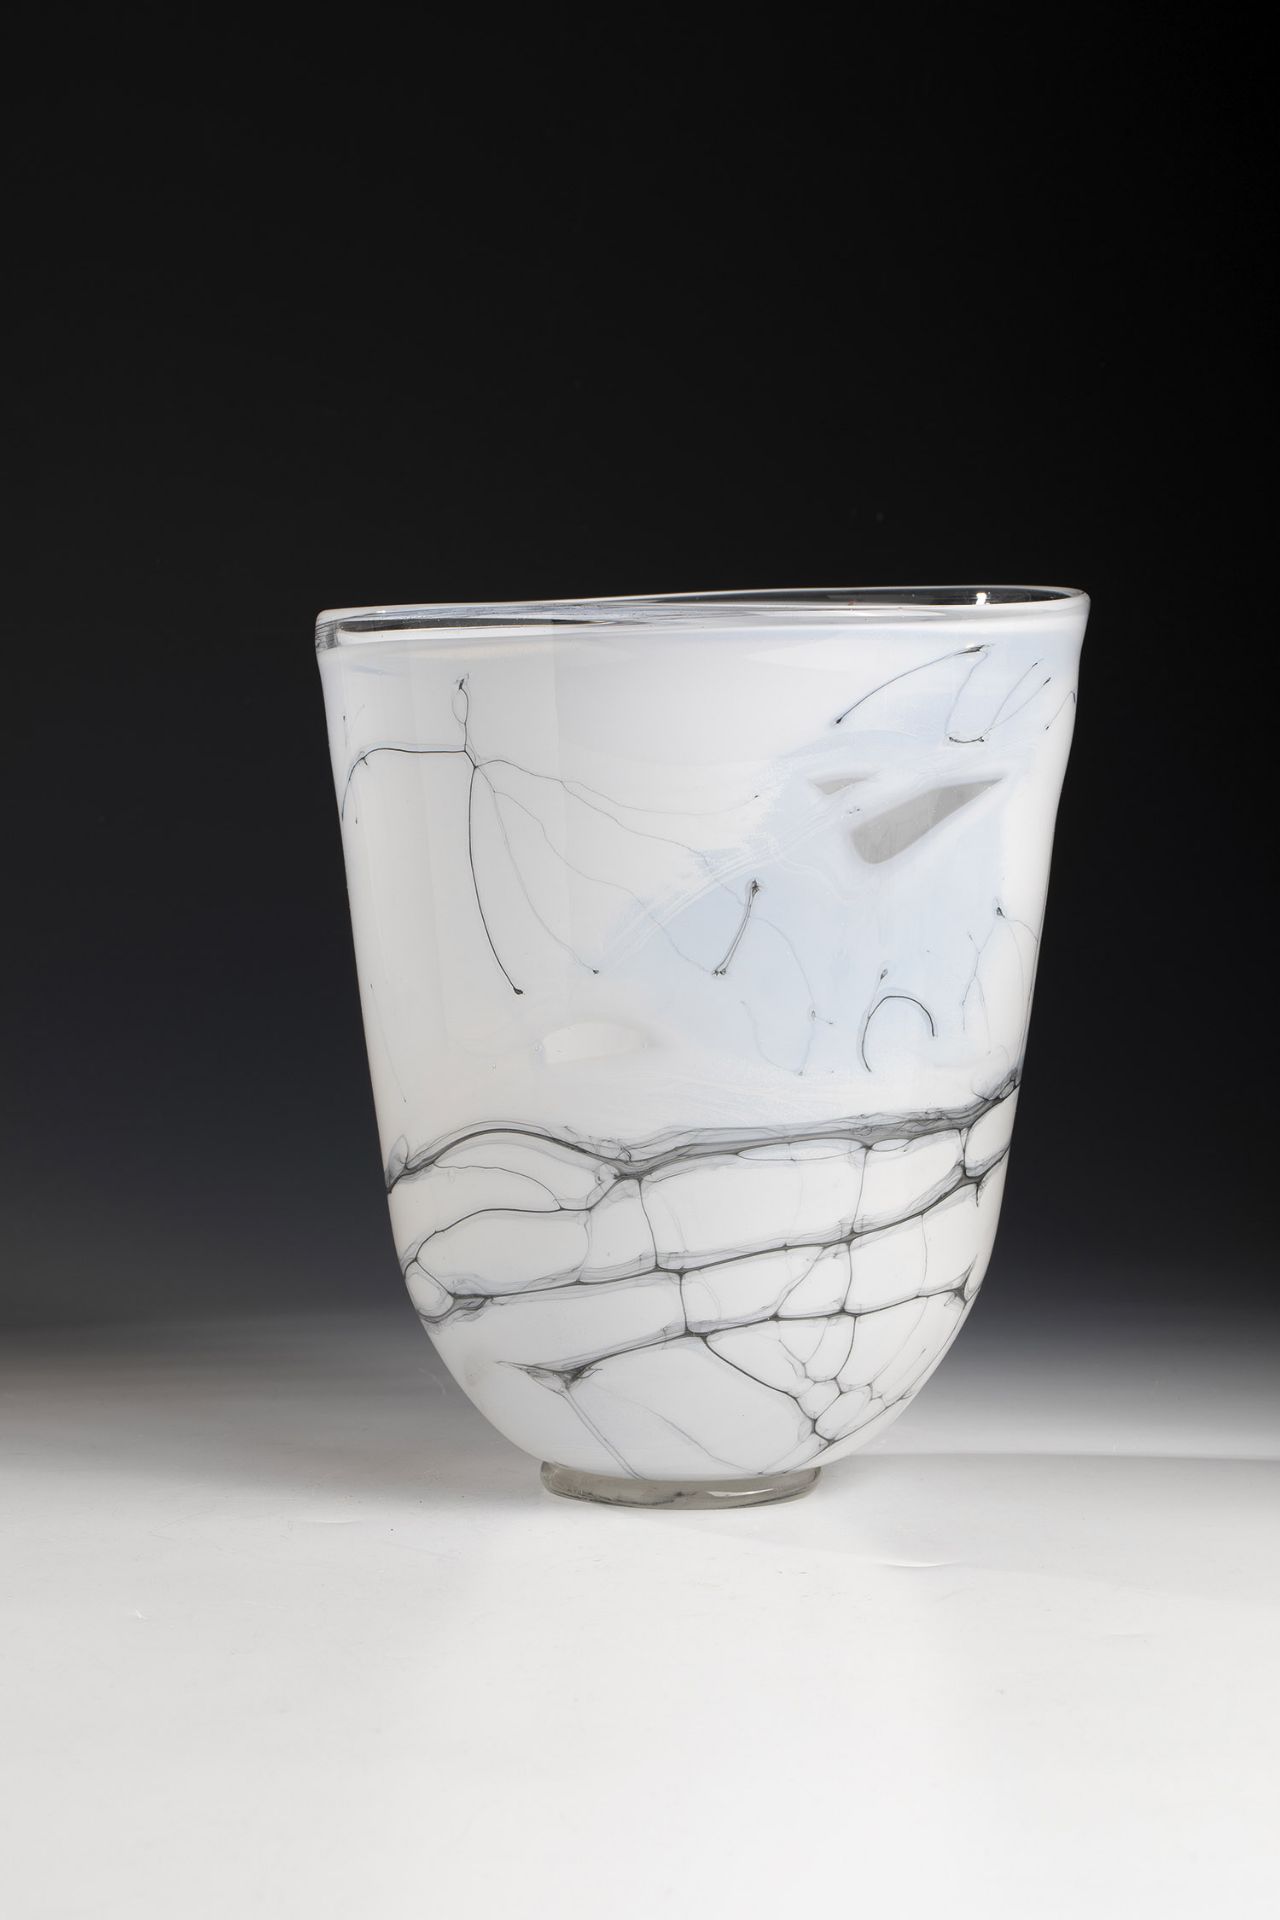 Vase Helmut W. Hundstorfer, 1983 Colourless glass, with grey-white opal underlay. On the wall, net-